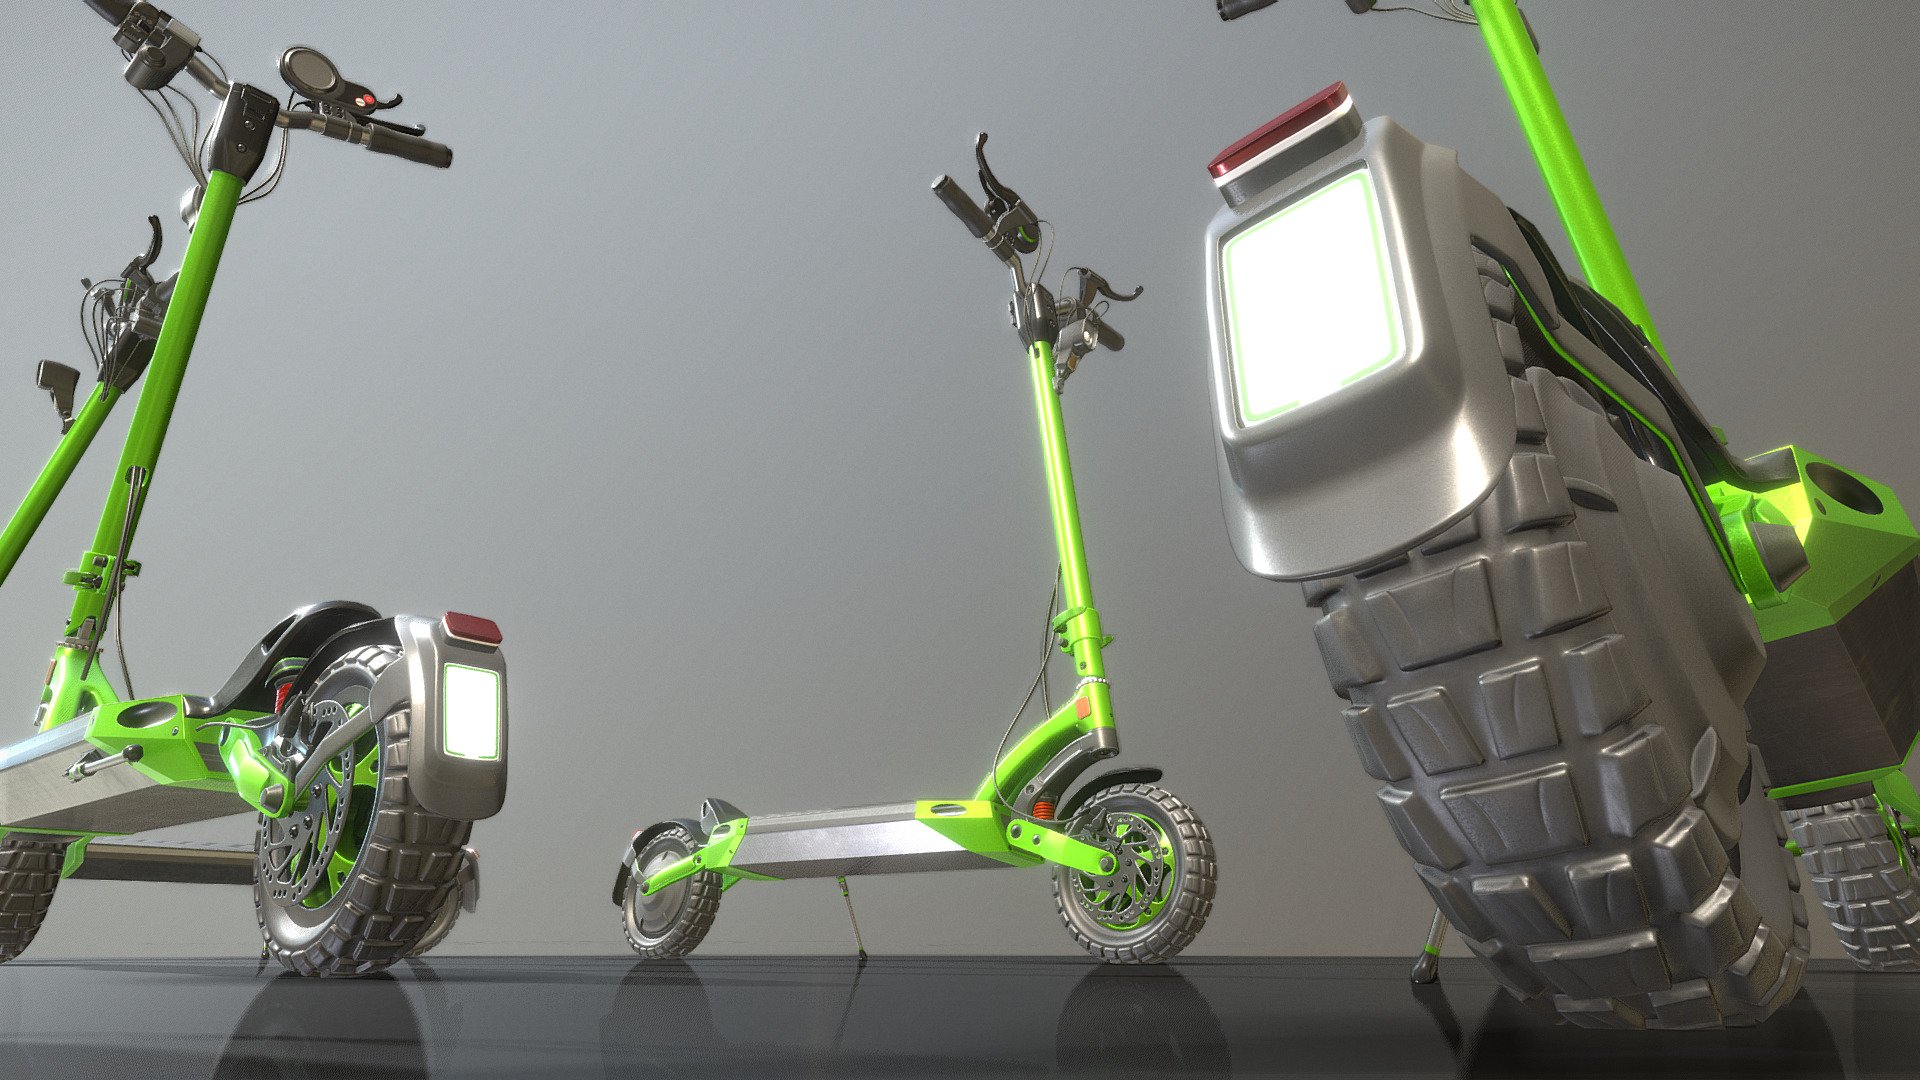 Here is the green version for the low-poly and pbr textured off-road e-scooter.





Object Name - E-Scooter_LP_Green_Drive 

Object Dimensions -  1.317m x 0.593m x 1.370m






Object Name - E-Scooter_LP_Green_Stand

Object Dimensions -  1.317m x 0.586m x 1.399m






Vertices = 26901

Edges = 60184

Polygons = 33193 






Materials

Material - E-Scoote_Green:




Blend Mode: OPAQUE

Shadow Mode: OPAQUE

E-Scooter_Green_Met_8K.jpg(8192x8192px)

E-Scooter_Green_Ro_8K.jpg(8192x8192px)

E-Scooter_Green_Nor_8K.jpg(8192x8192px)

E-Scooter_Green_Col_8K.jpg(8192x8192px)

Material - Glass_E-Scoote_Green:




Blend Mode: BLEND

Shadow Mode: OPAQUE

E-Scooter_Green_Met_8K.jpg(8192x8192px)

E-Scooter_Green_Ro_8K.jpg(8192x8192px)

E-Scooter_Green_Col_8K.jpg(8192x8192px)






Last update:
16:30:47  11.04.23
 - Offroad E-Scooter Green Version - Buy Royalty Free 3D model by VIS-All-3D (@VIS-All) 3d model